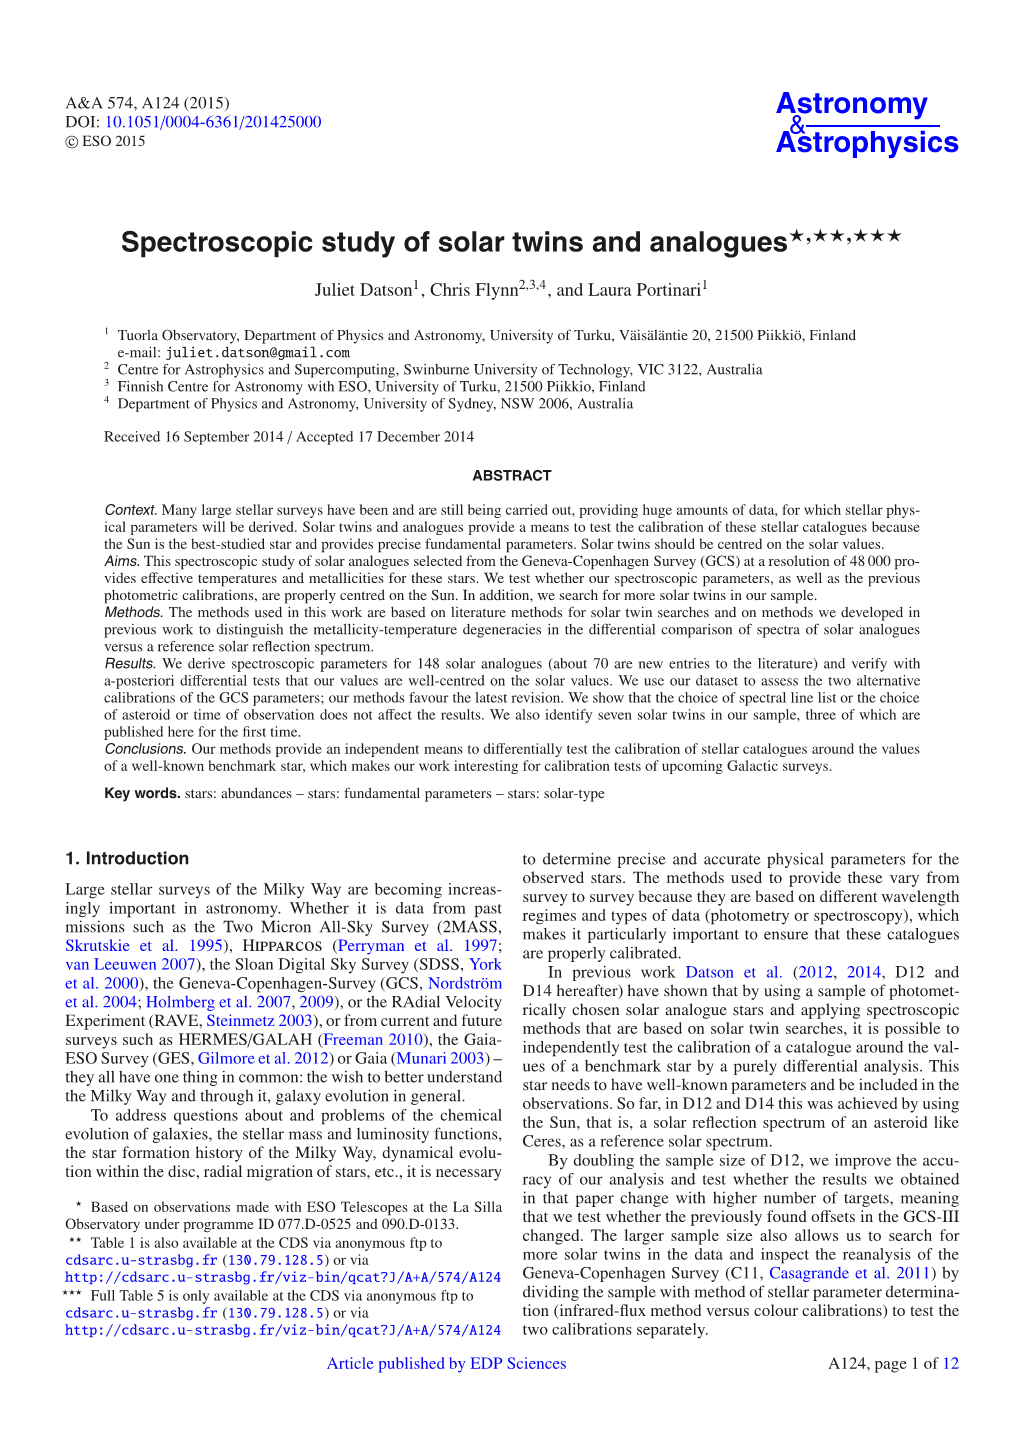 Spectroscopic Study of Solar Twins and Analogues⋆⋆⋆⋆⋆⋆